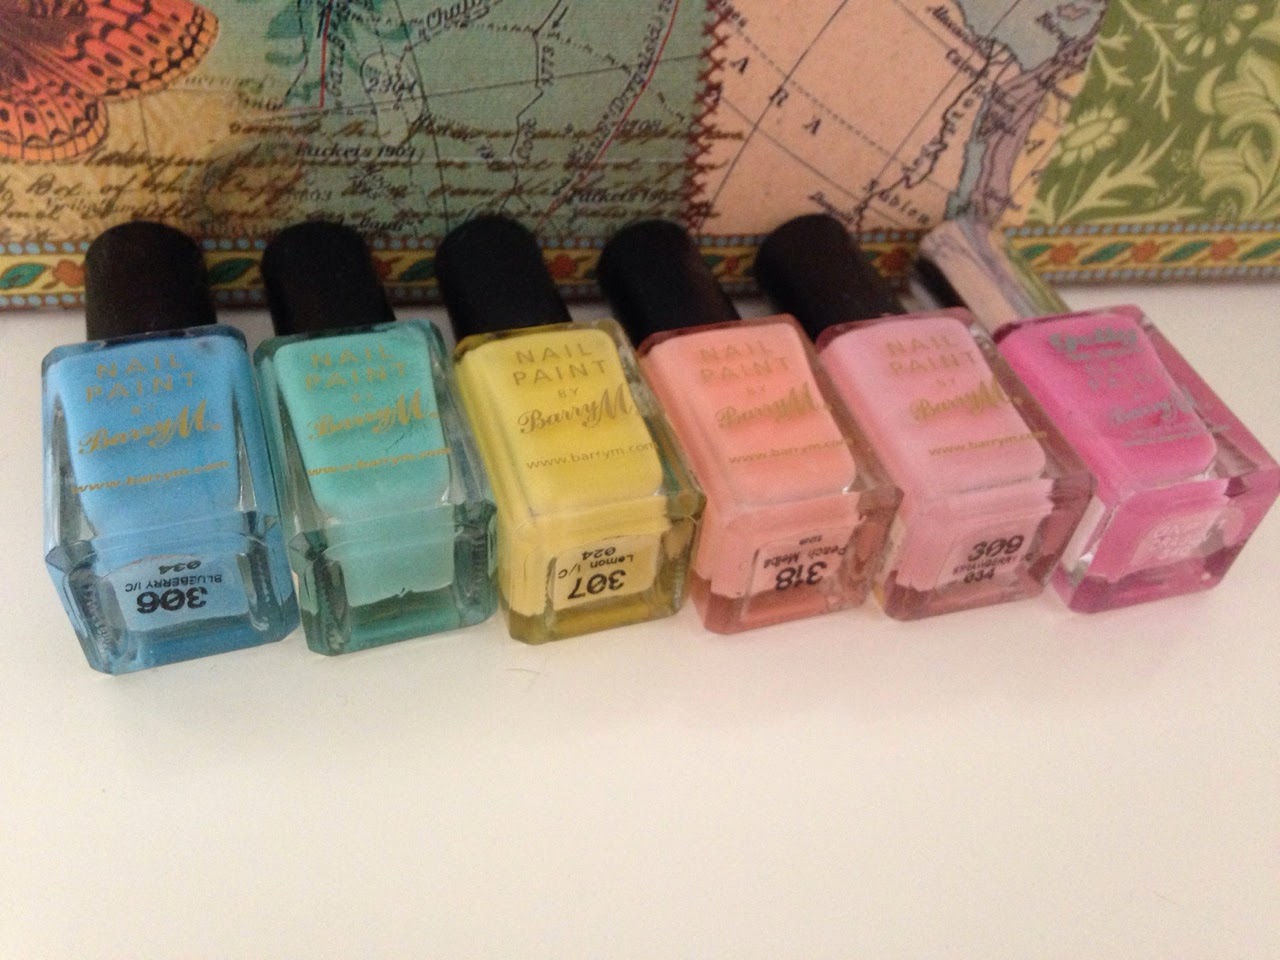 barry m nail polishes in pastel shades